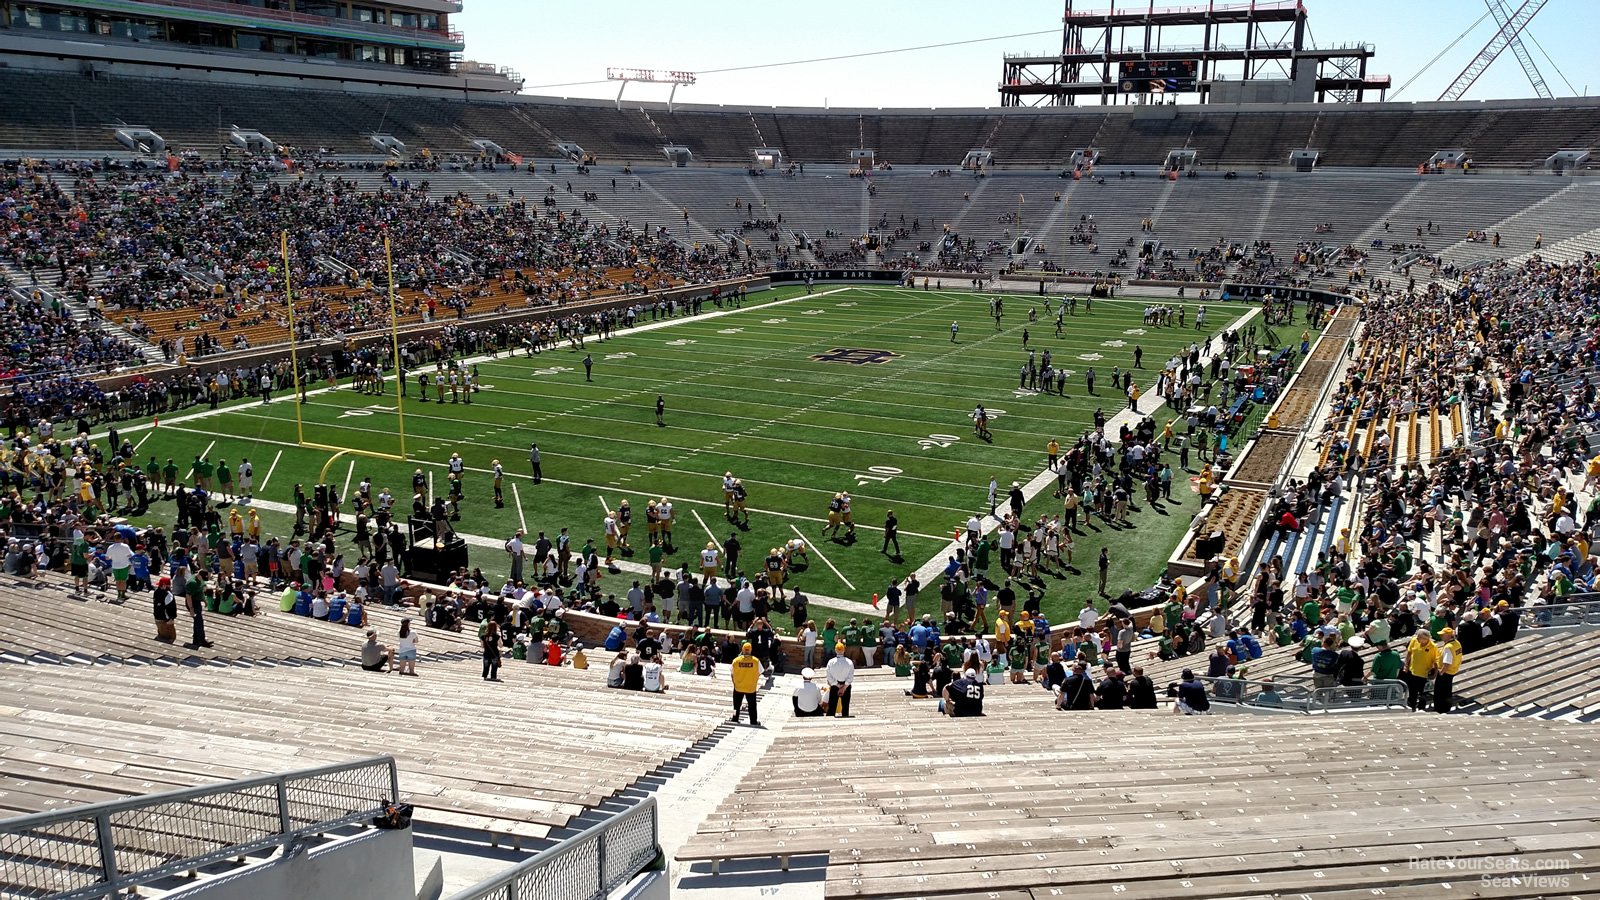 section 34, row 58 seat view  - notre dame stadium